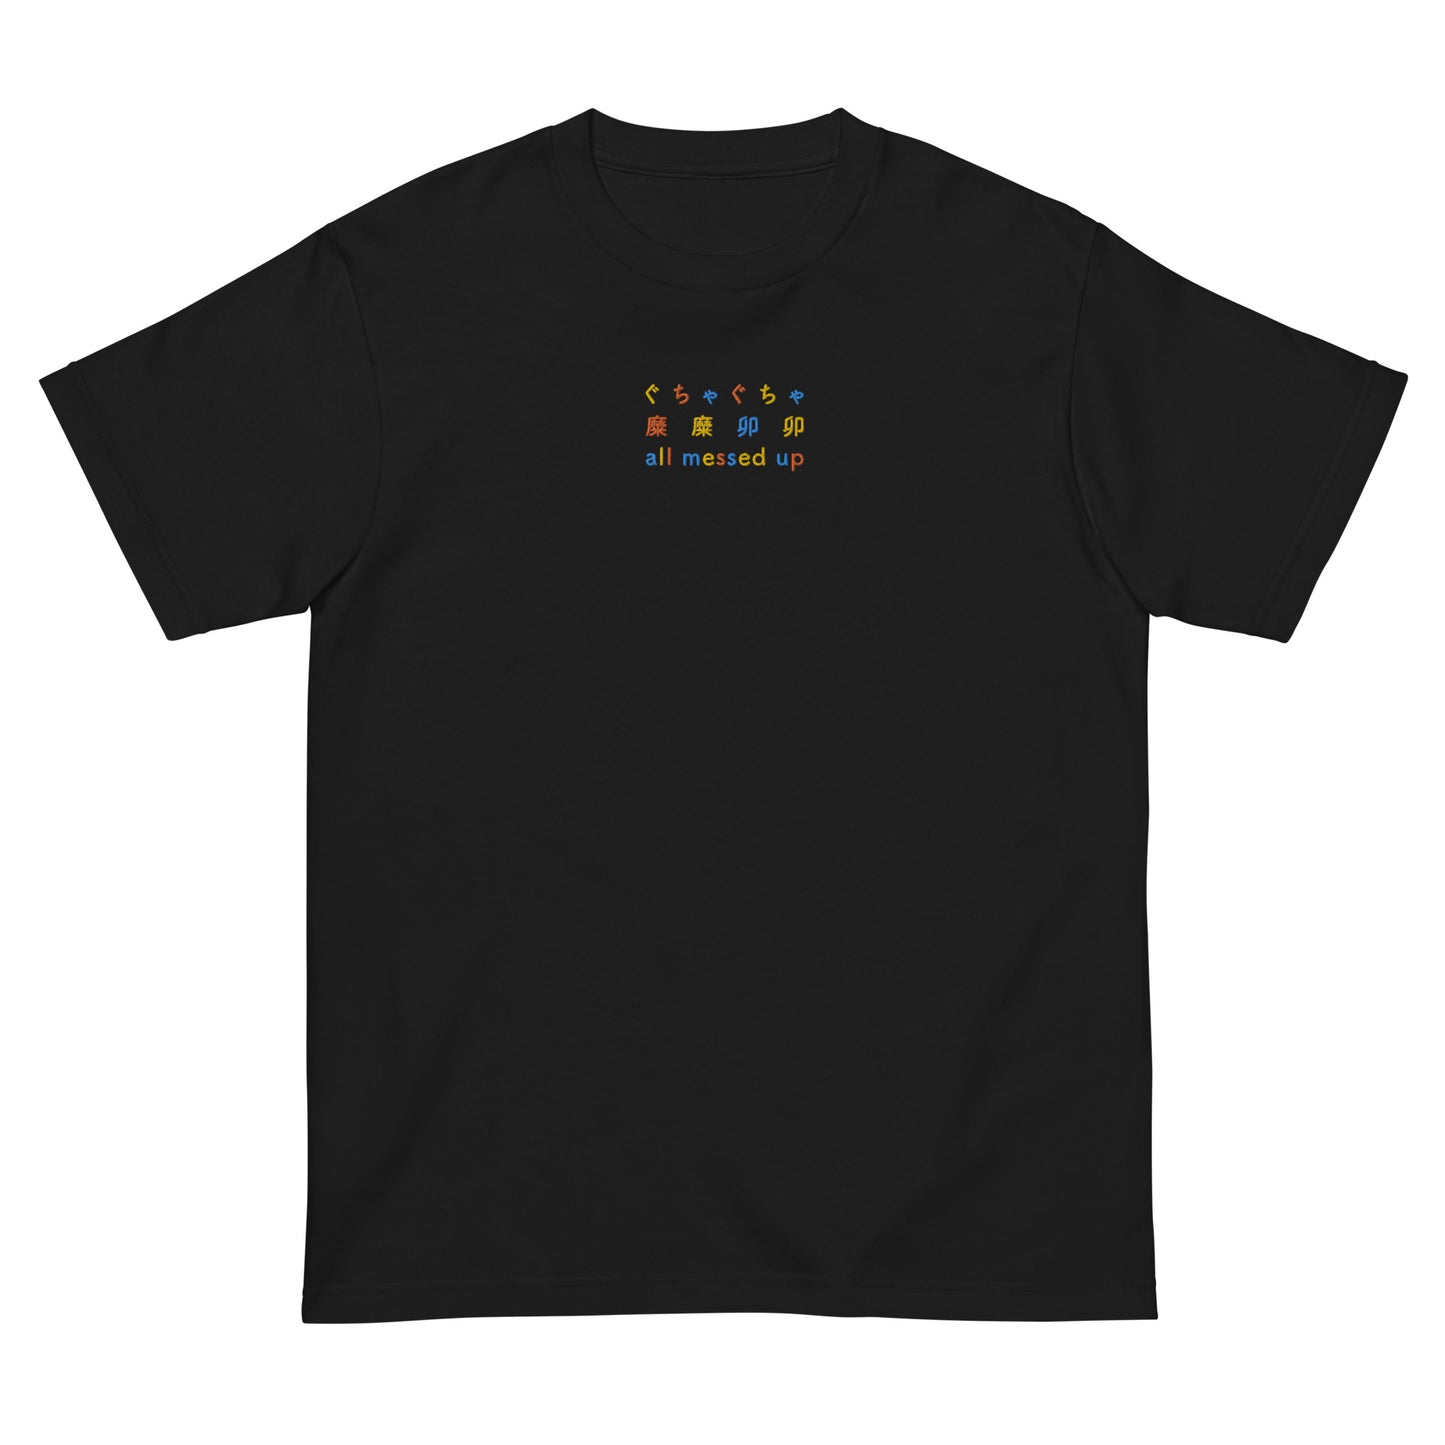 Black High Quality Tee - Front Design with an Yellow,Orange,Blue Embroidery "All Messed Up" in Japanese,Chinese and English